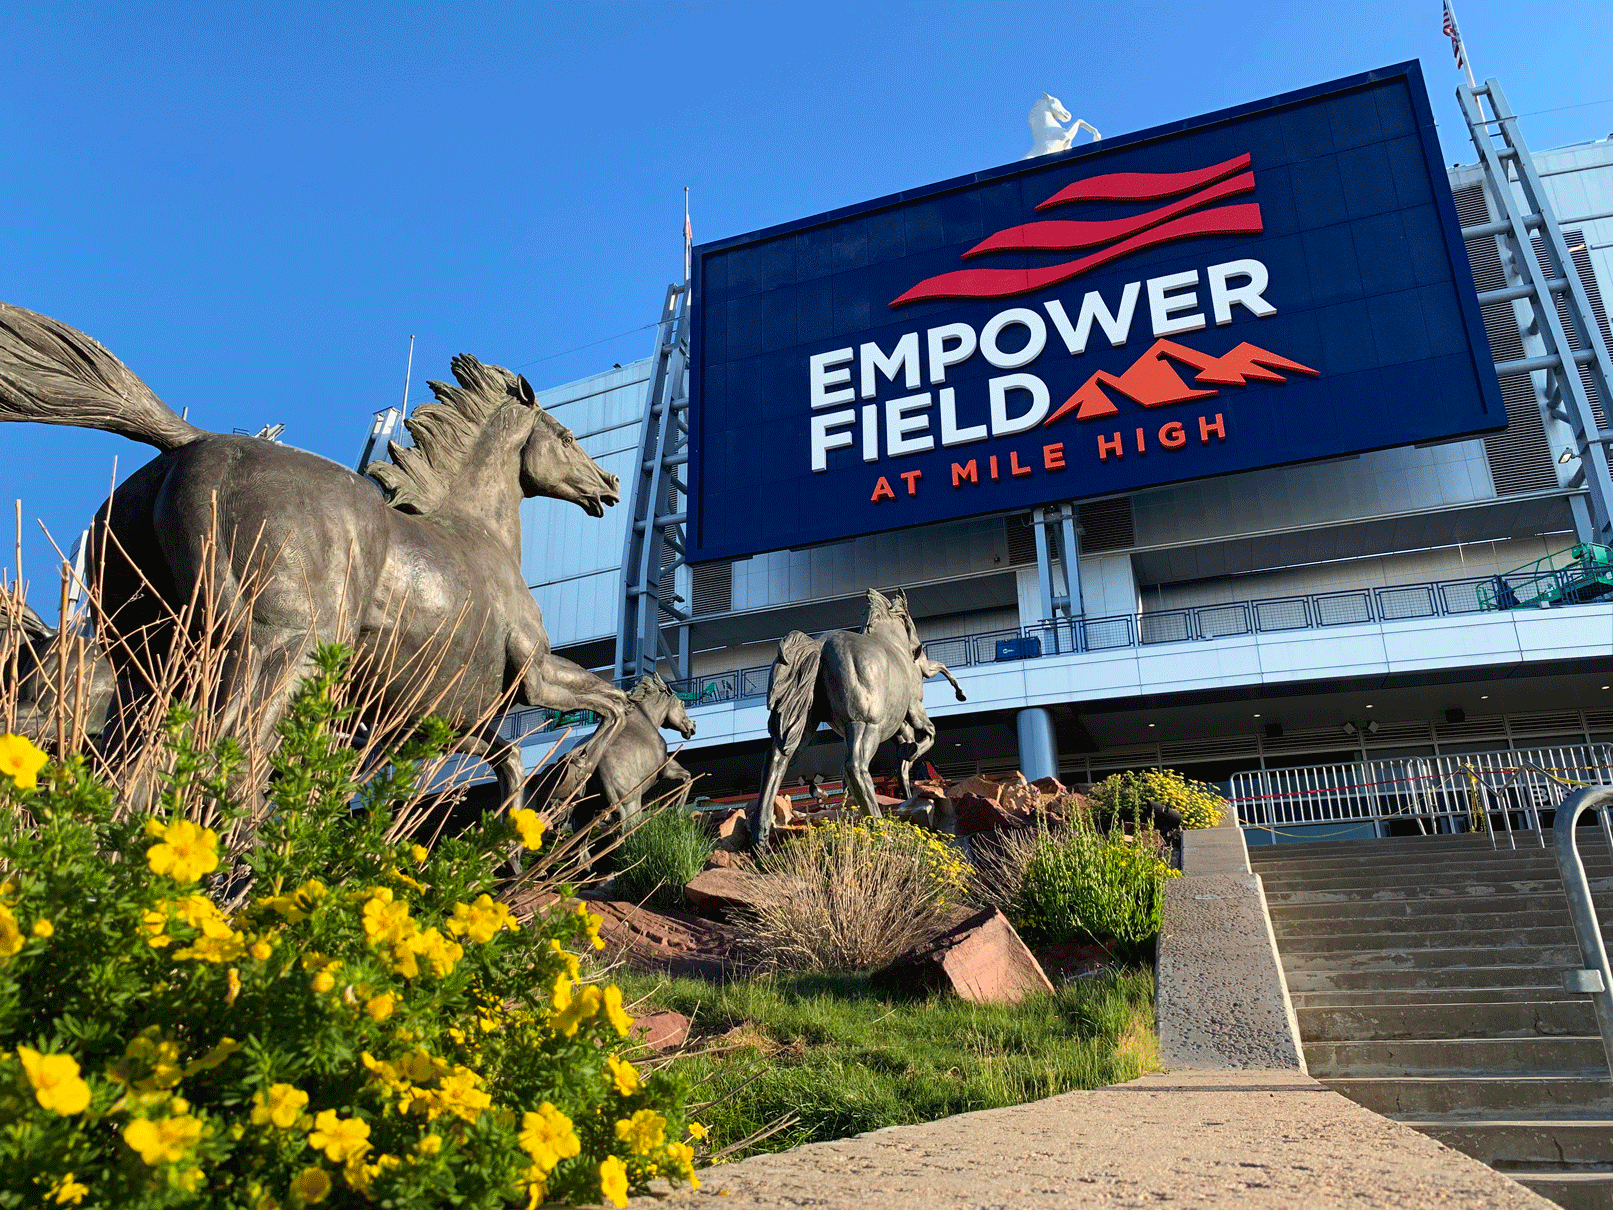 Empower Field at mile high